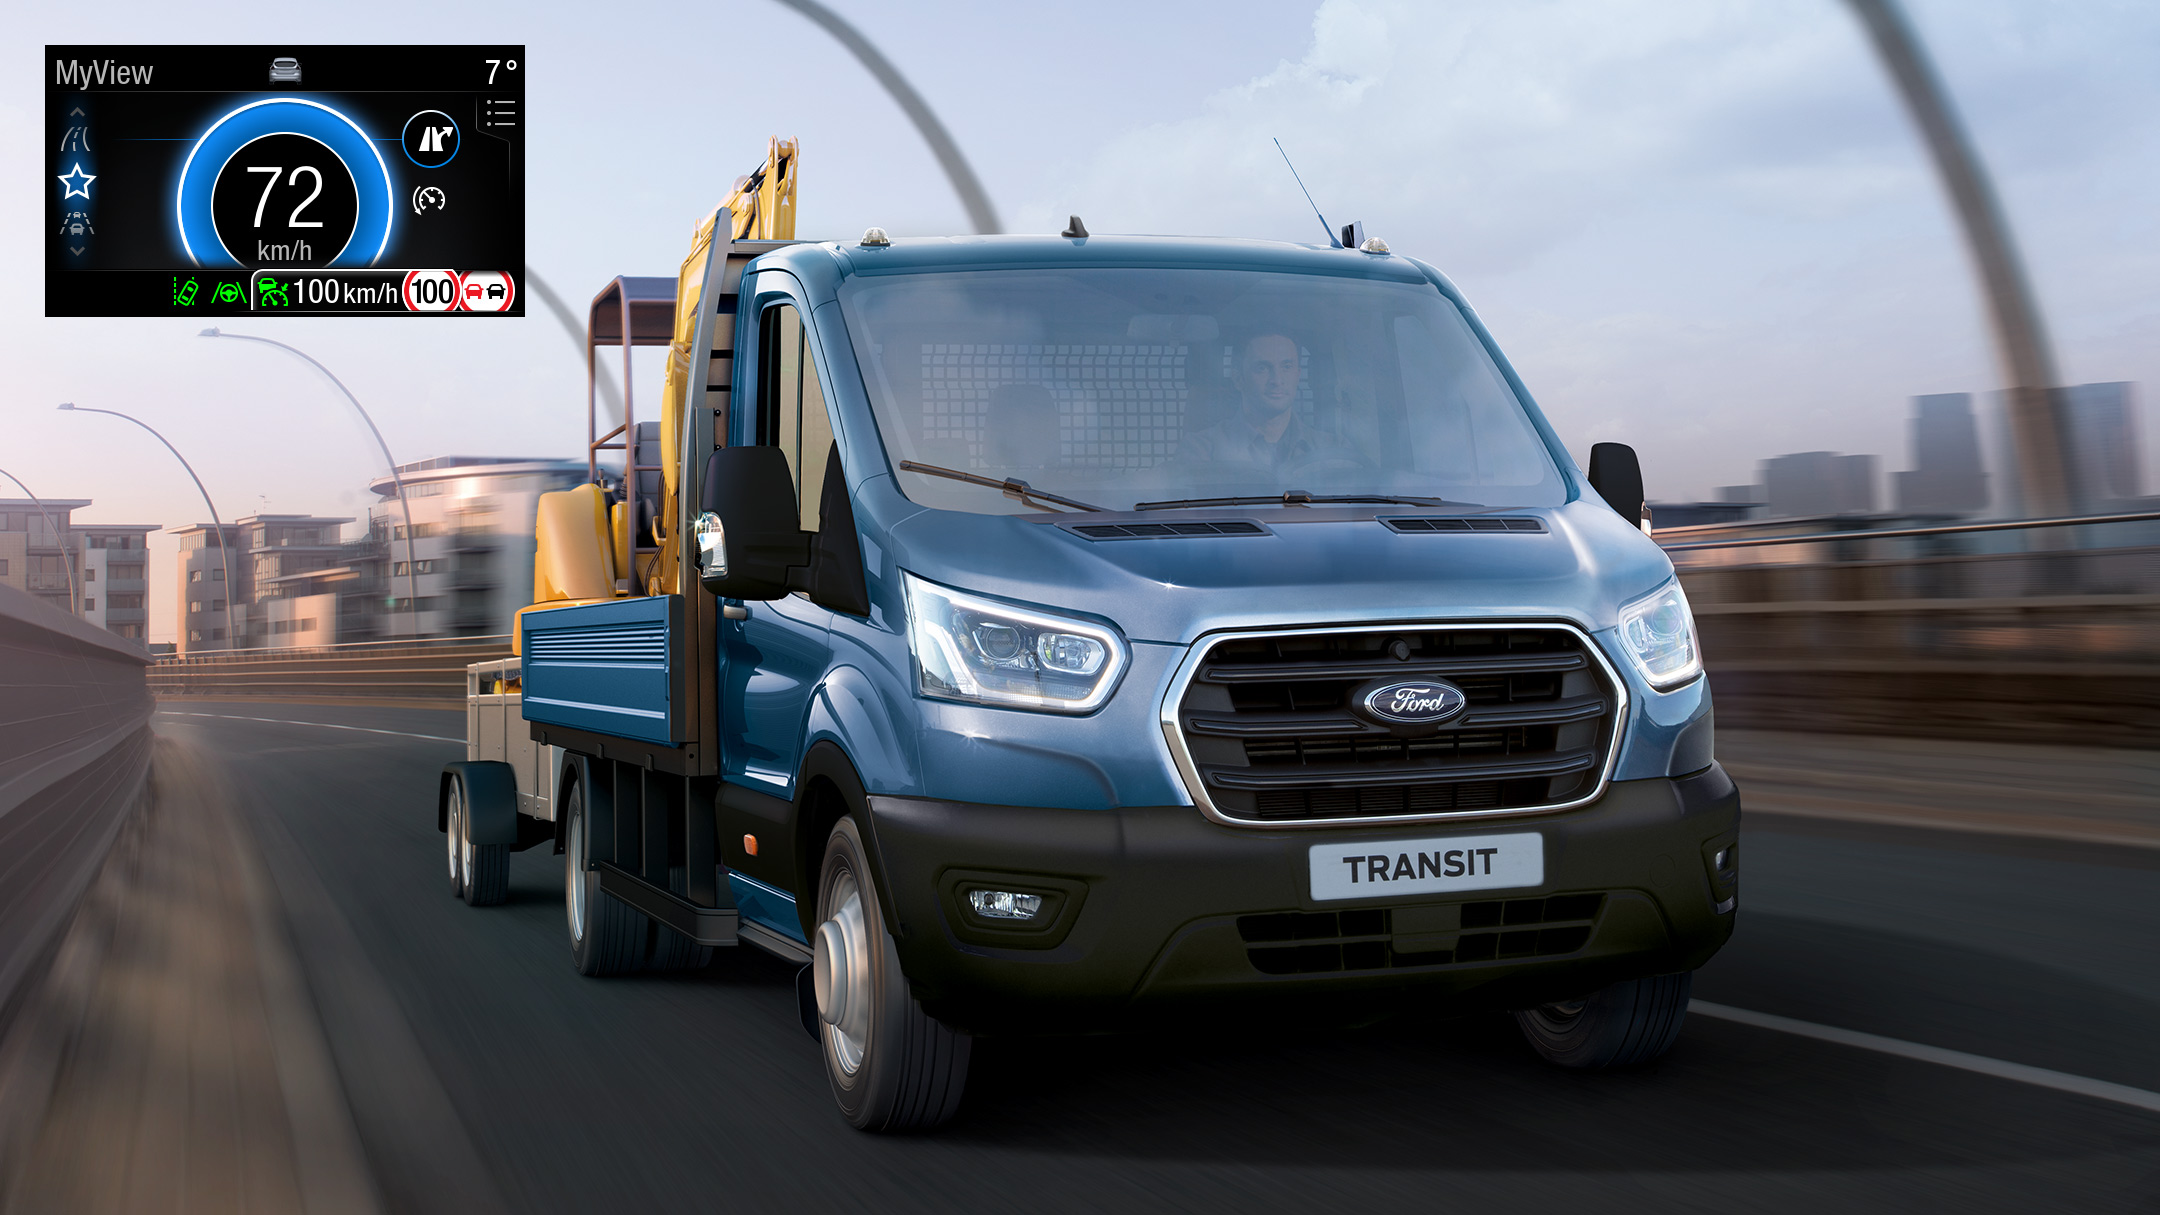 Ford transit chassis cab with ecoguide graphic